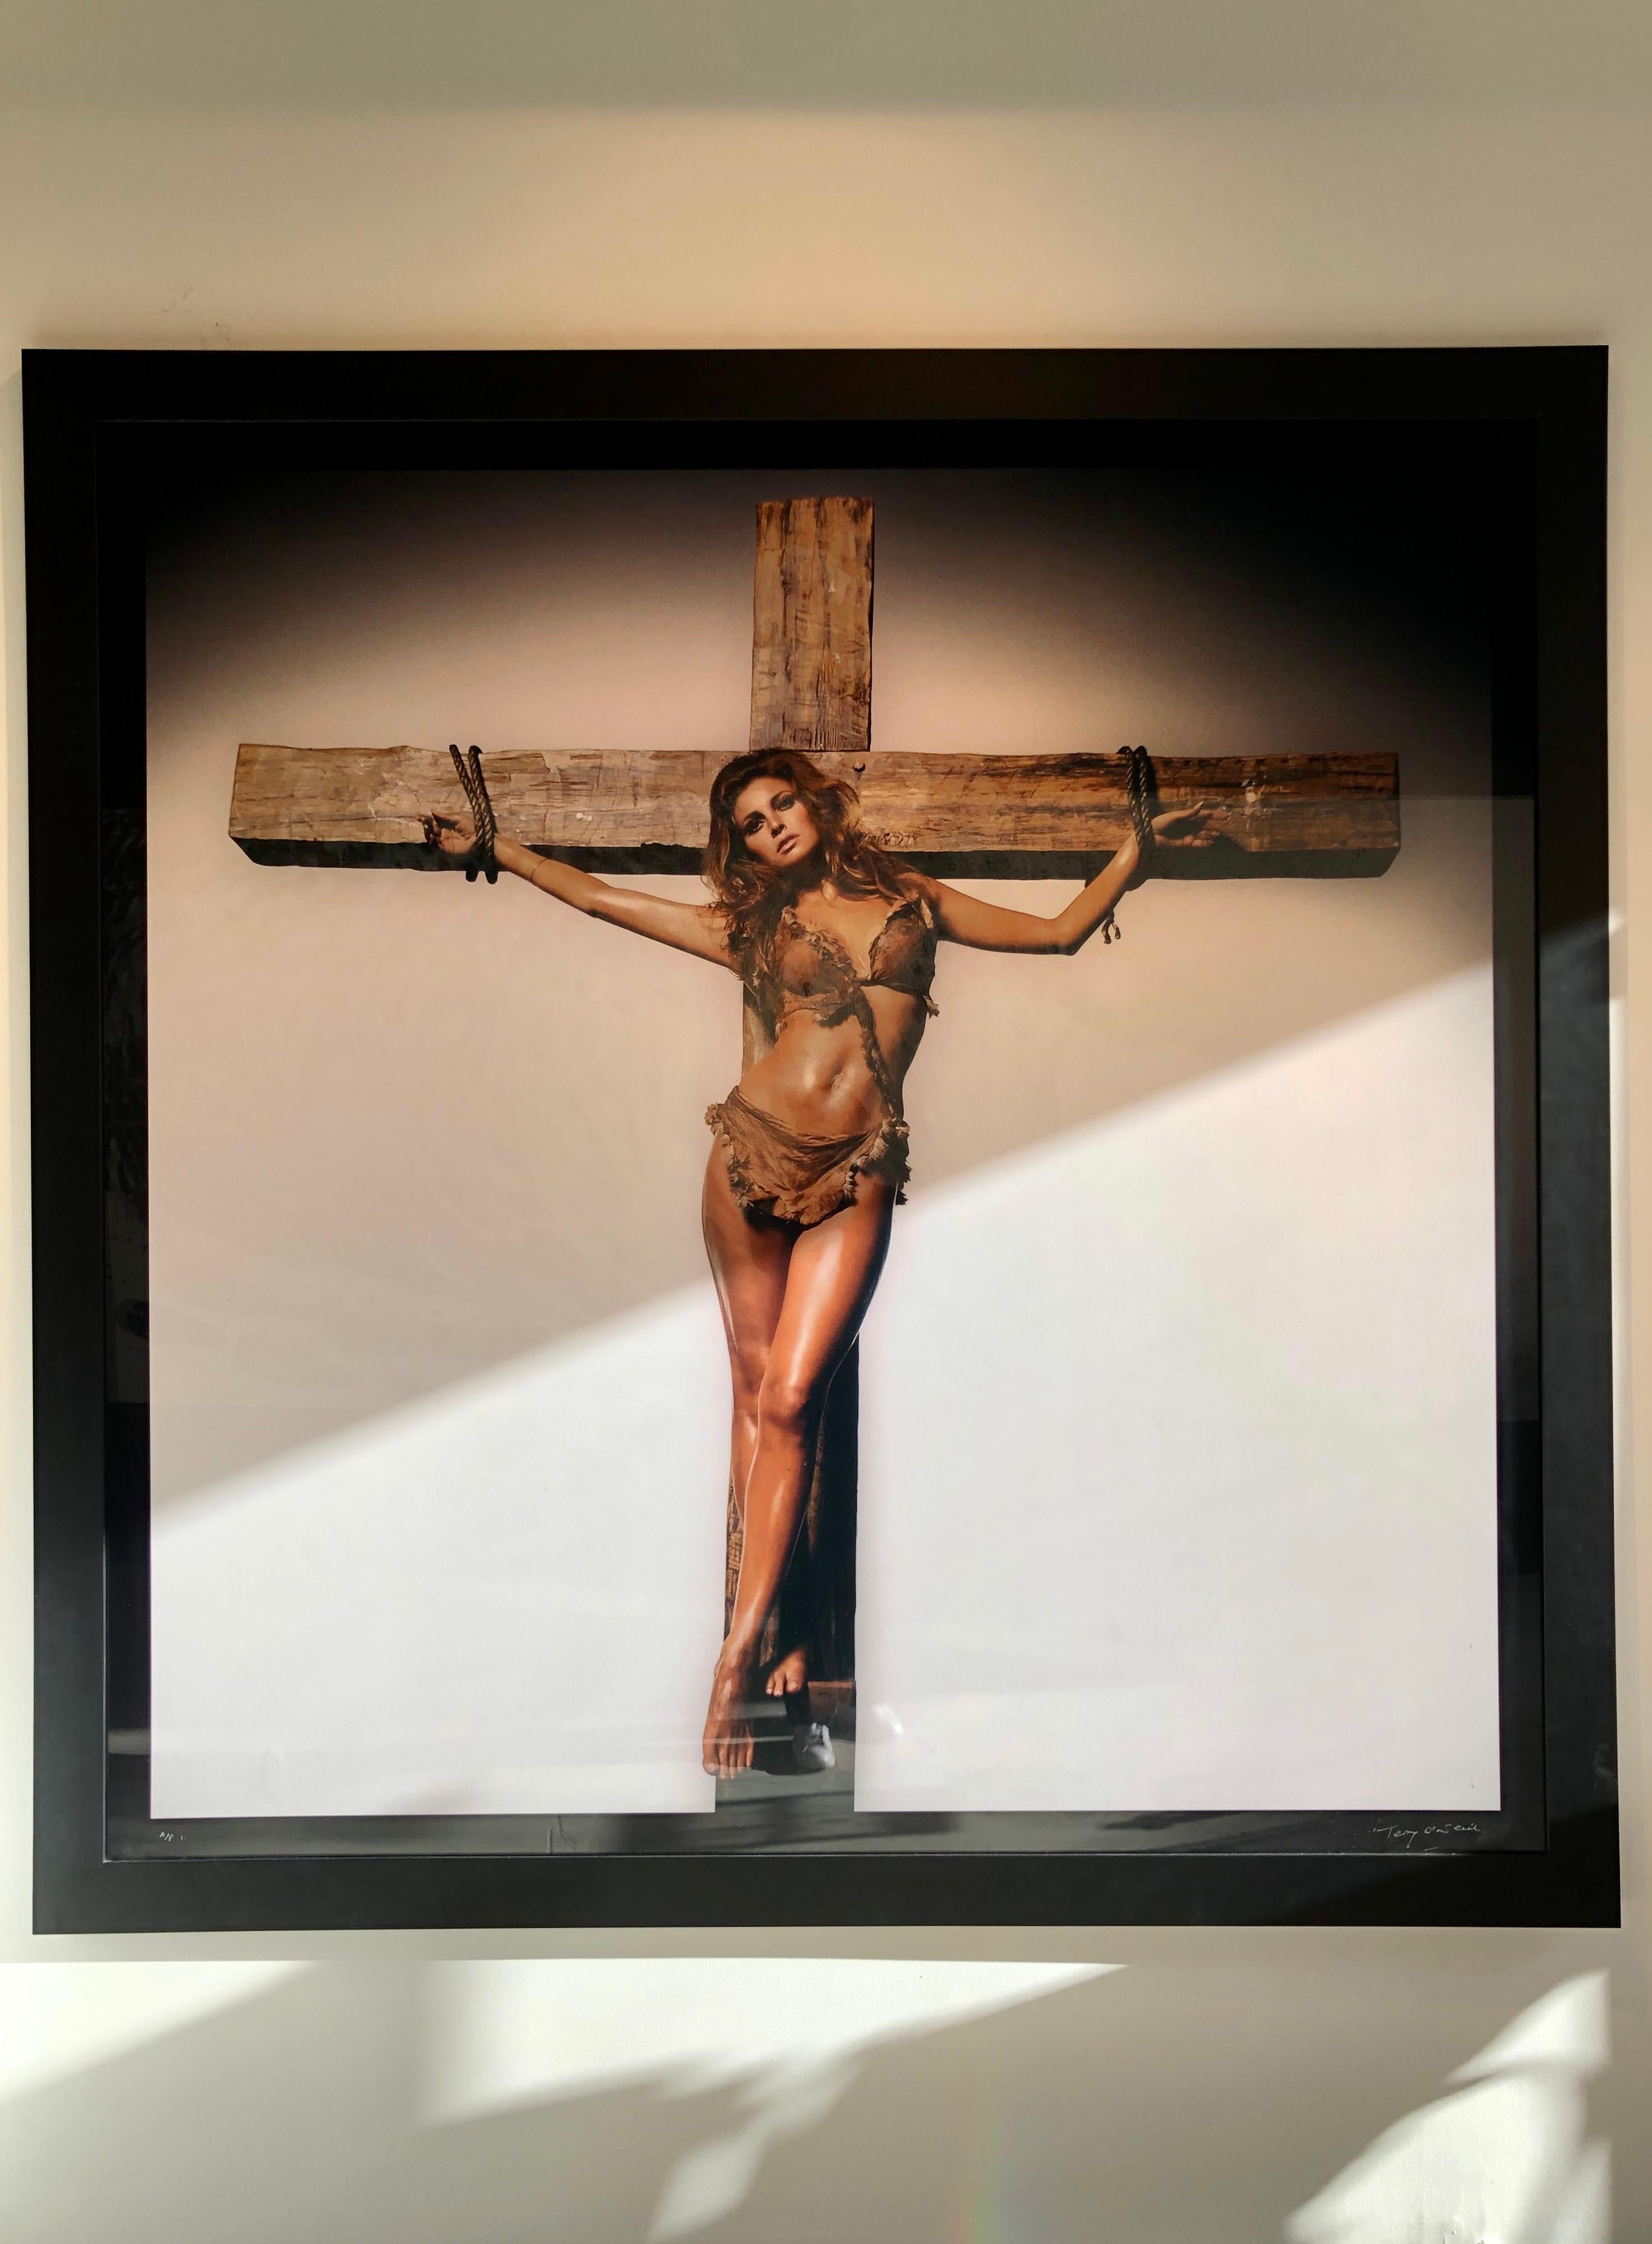 Raquel Welch on Cross - Photograph by Terry O'Neill